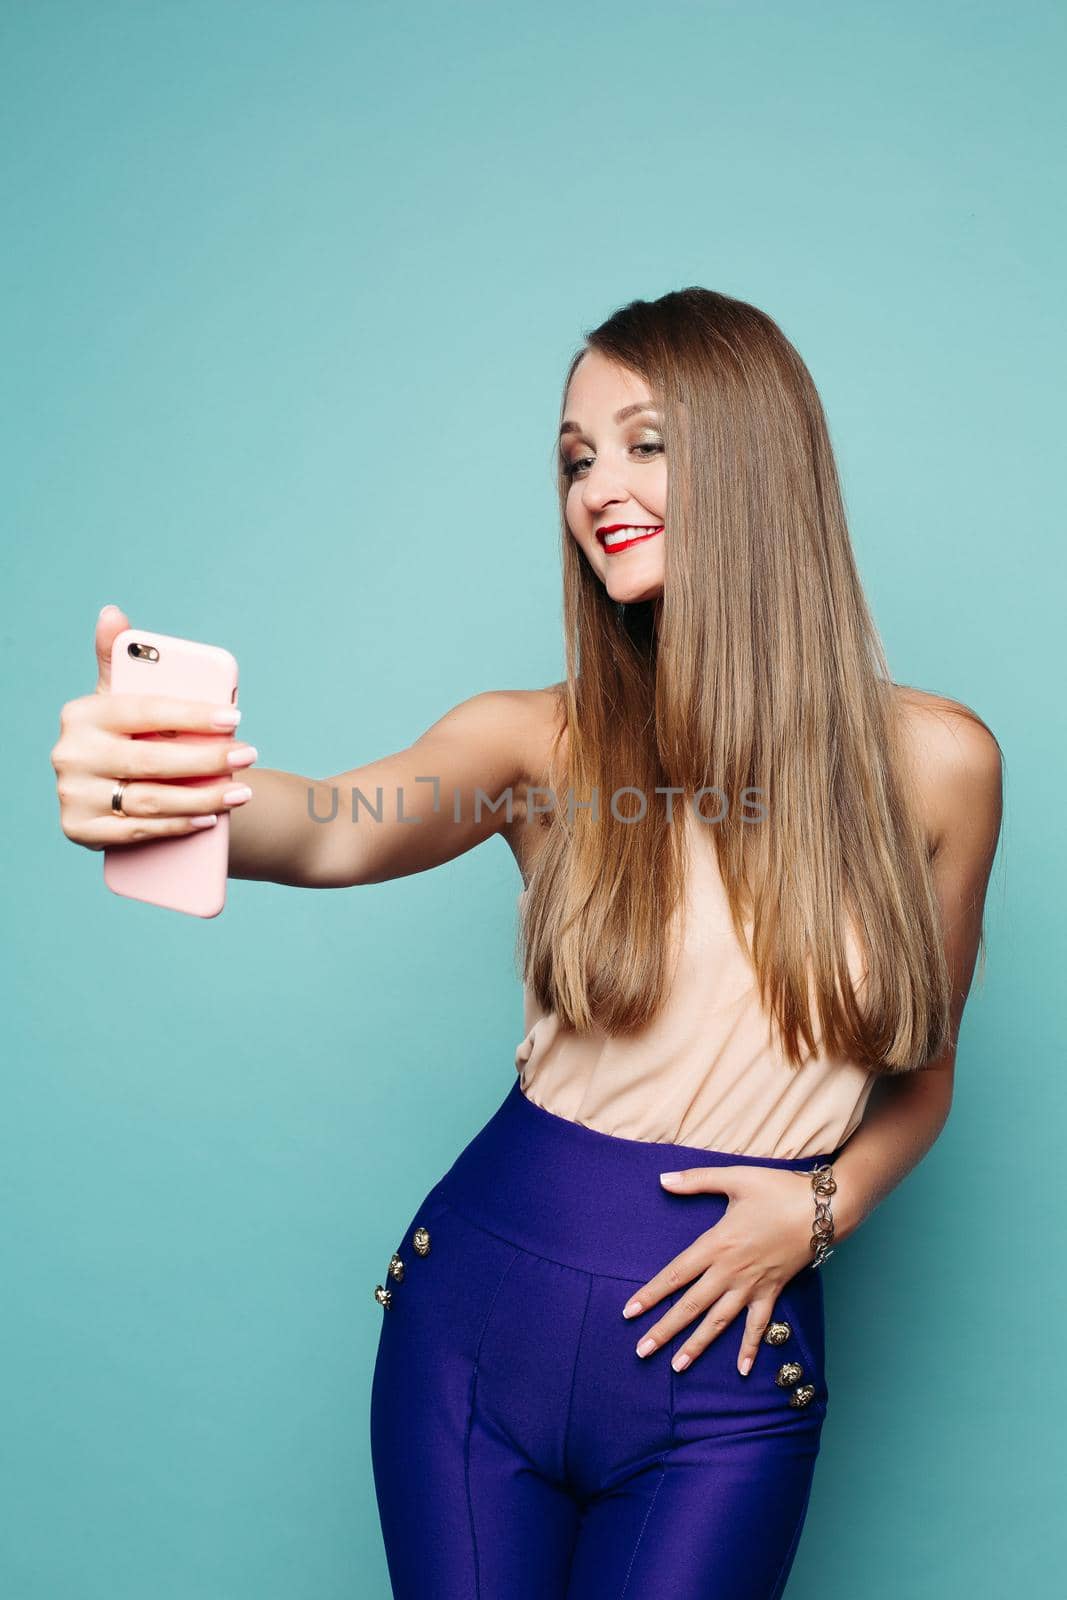 Studio portrait of beautiful elegant blonde woman with straight hair in blue trousers and top taking selfie with mobile phone over green background. Isolate.